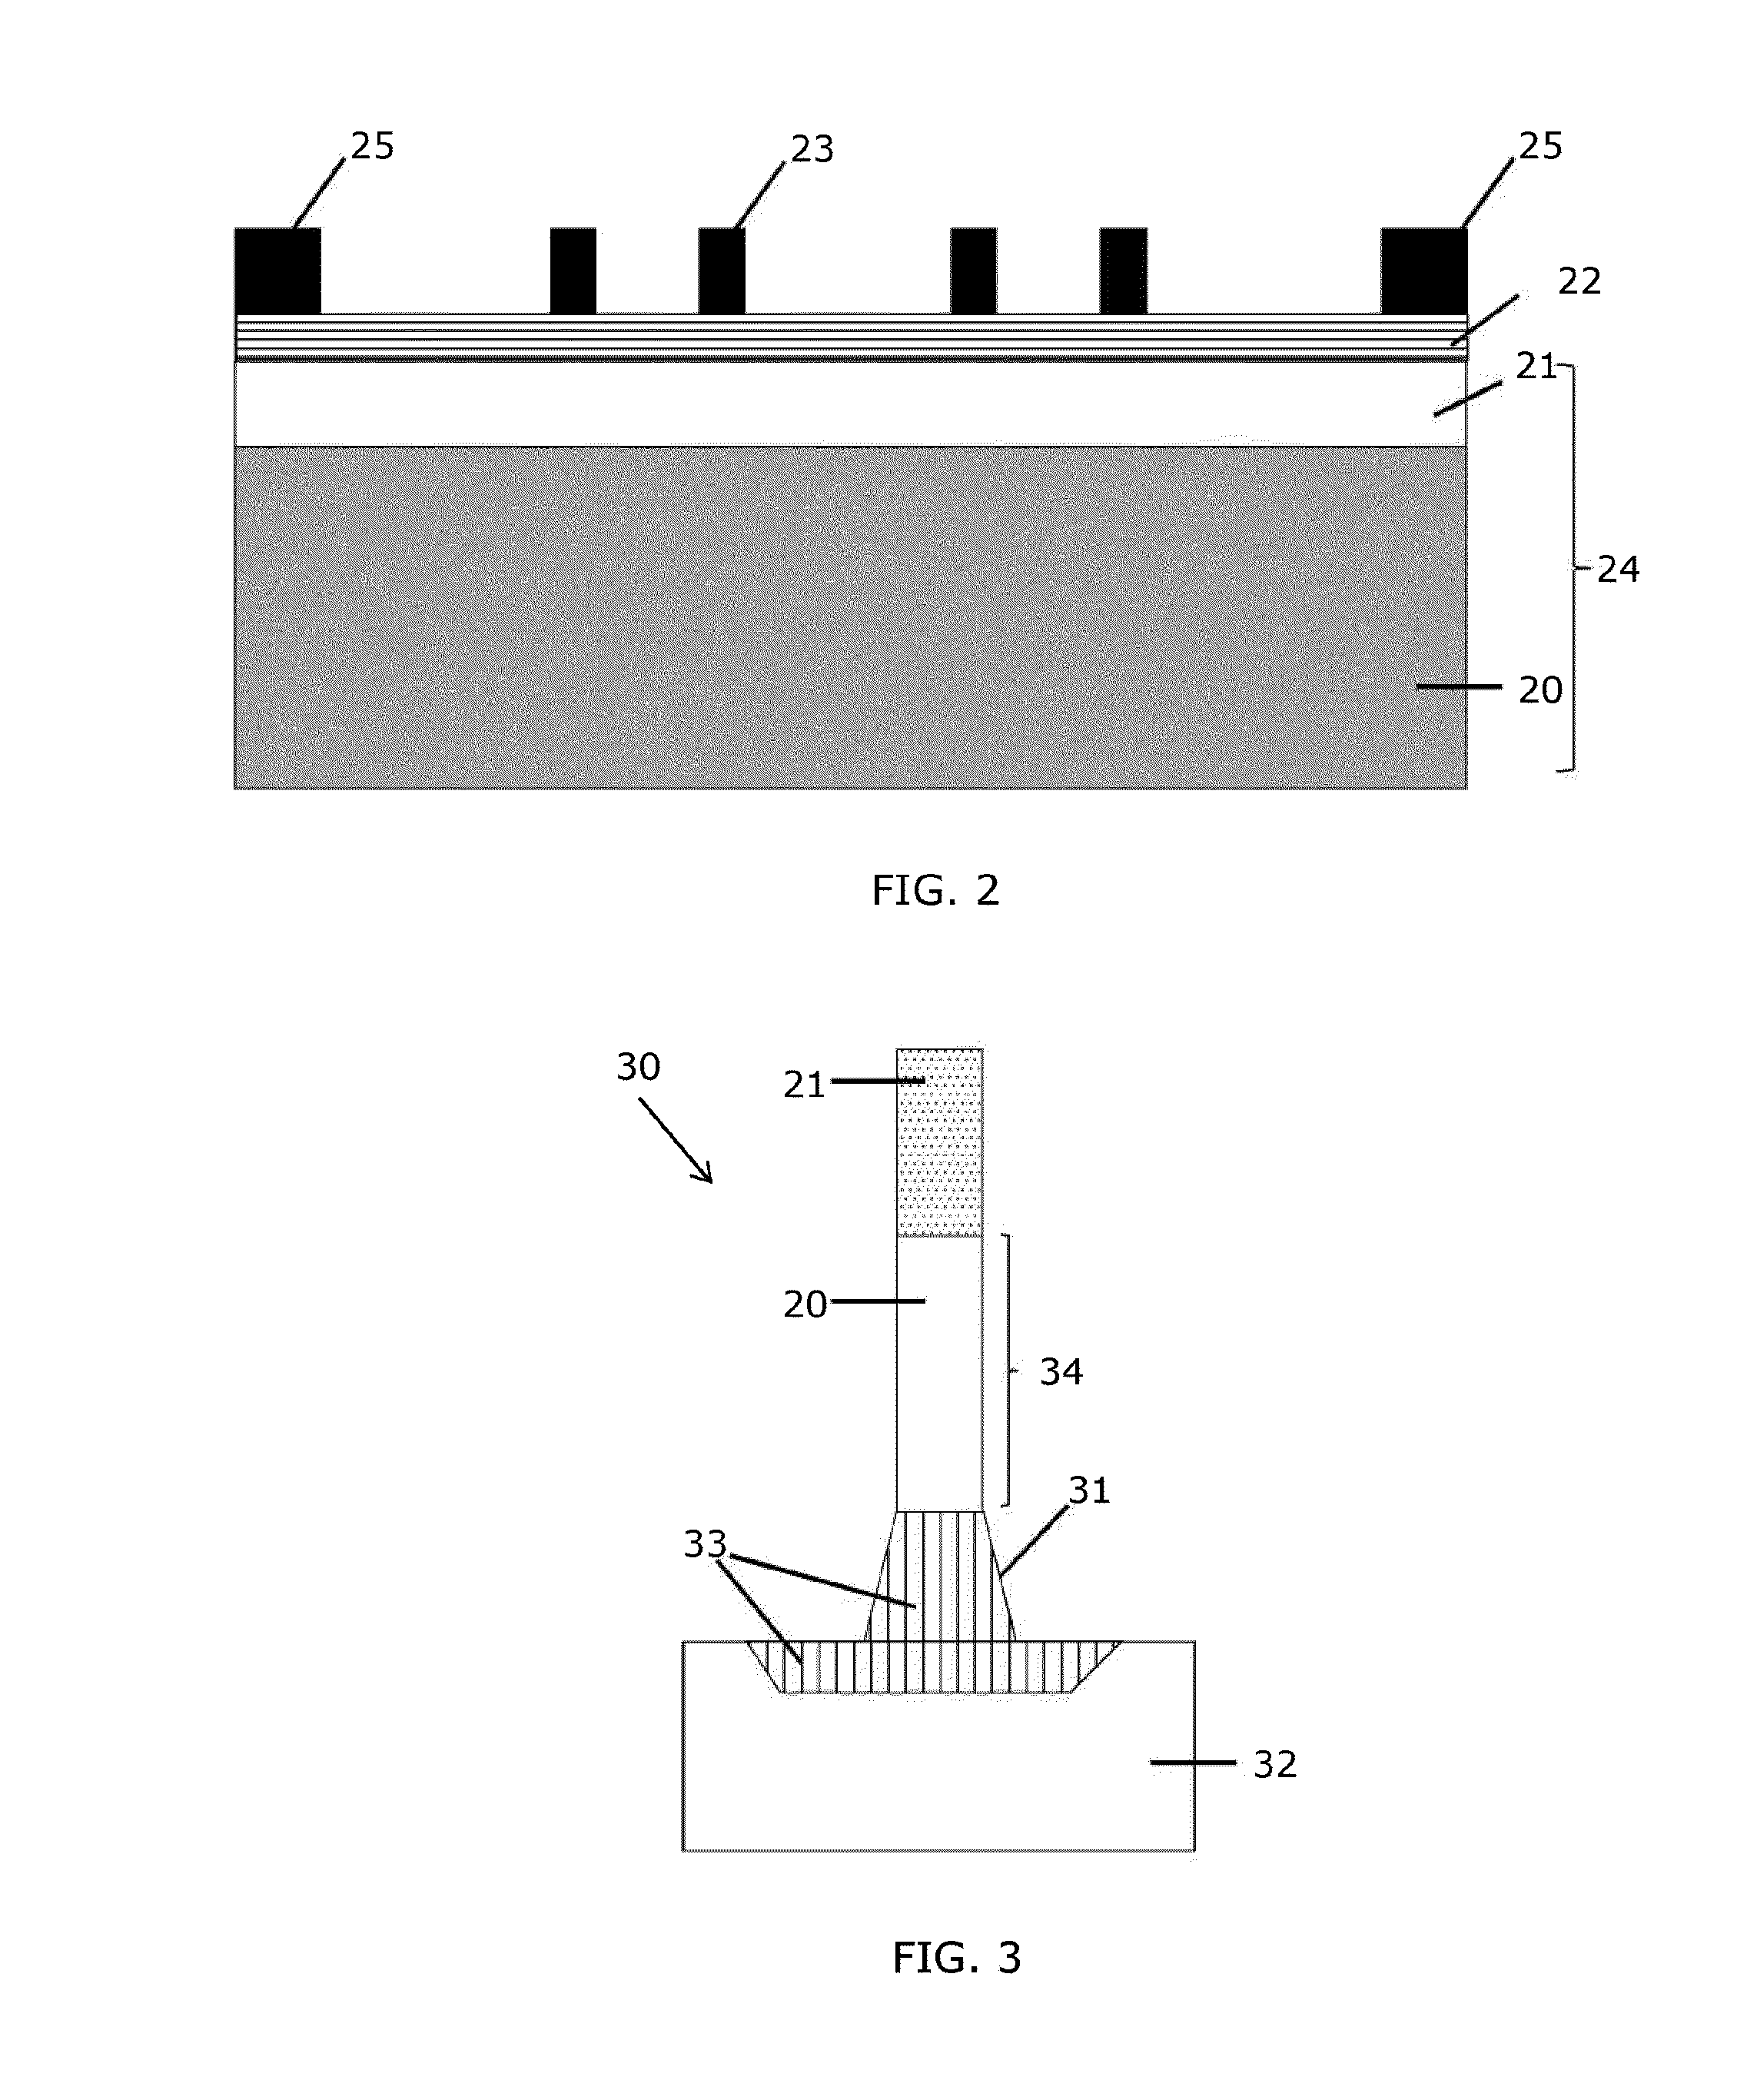 Method of manufacturing a complementary nanowire tunnel field effect transistor semiconductor device